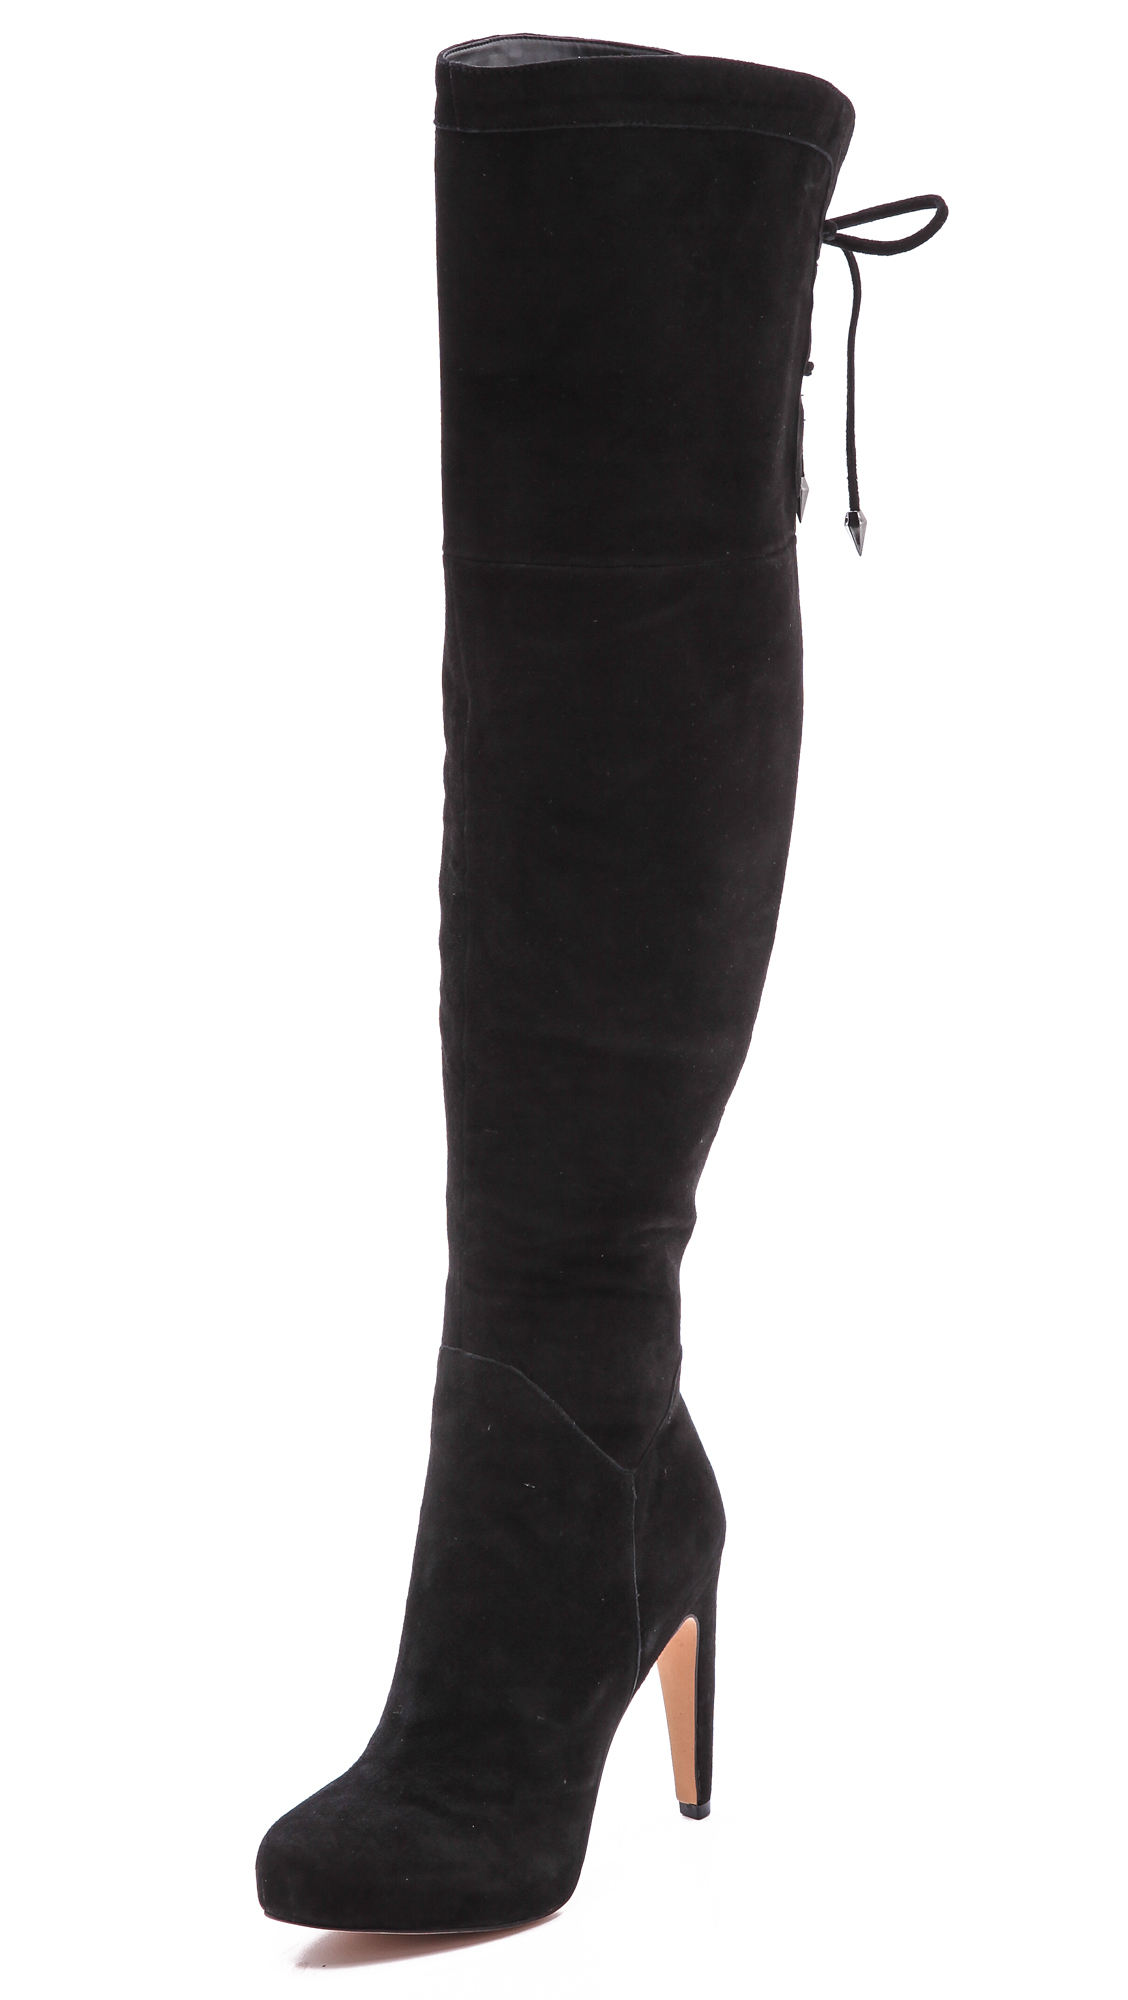 Sam edelman Kayla Over The Knee Boots in Black | Lyst